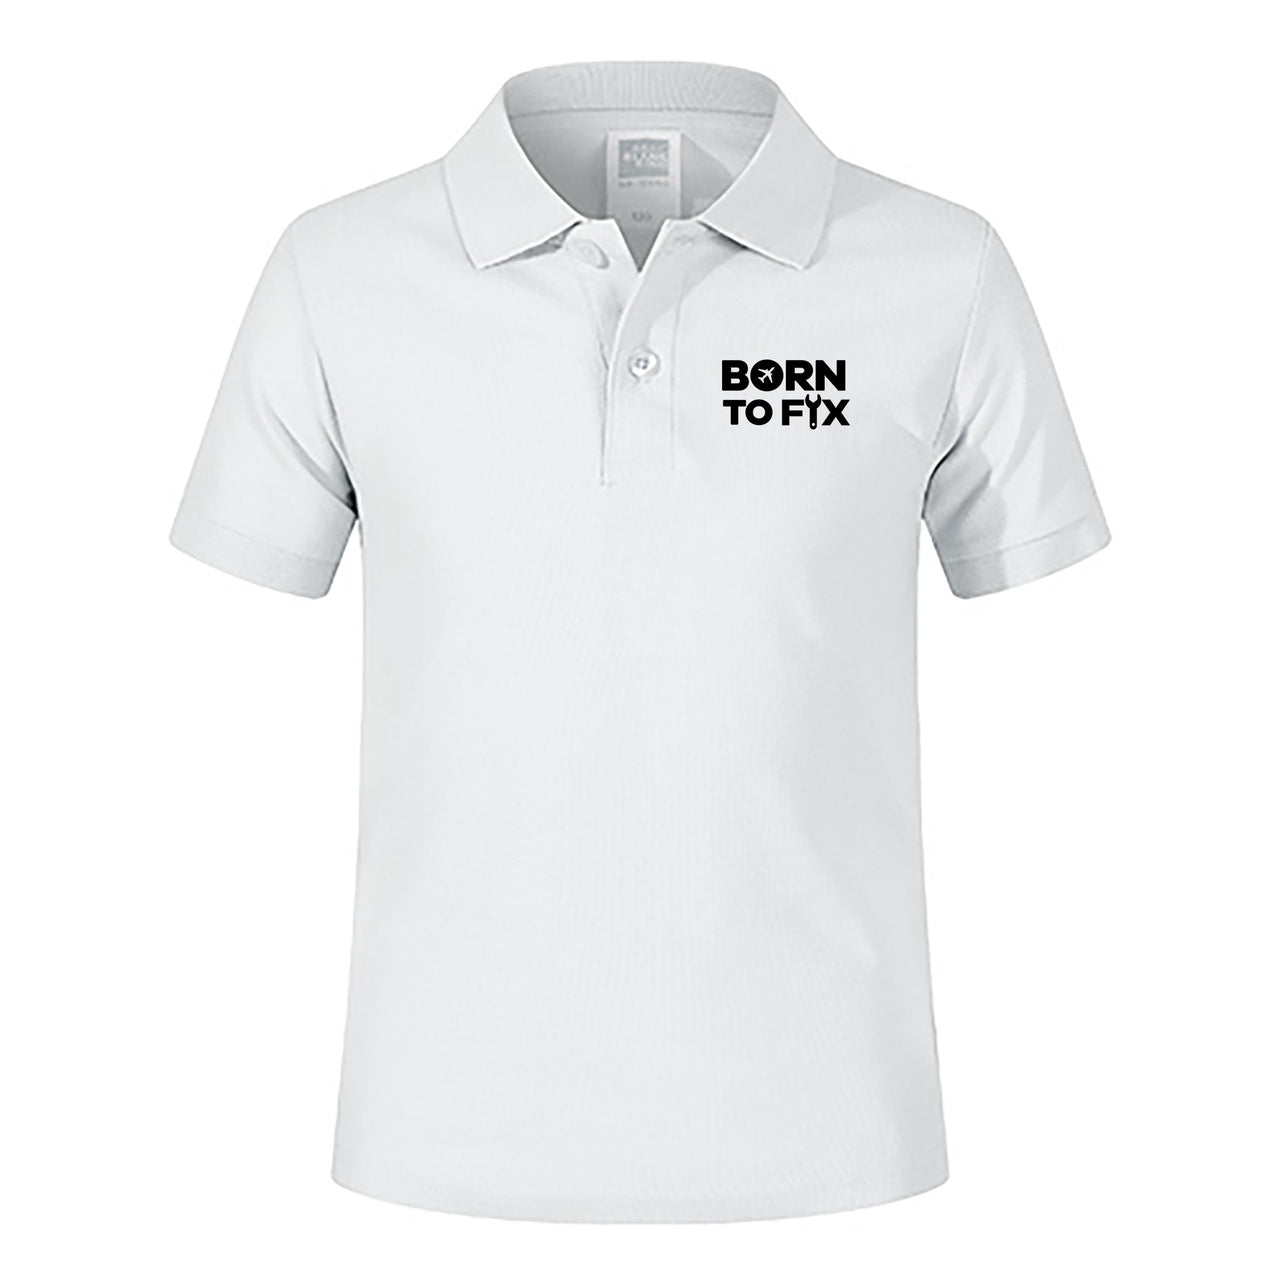 Born To Fix Airplanes Designed Children Polo T-Shirts